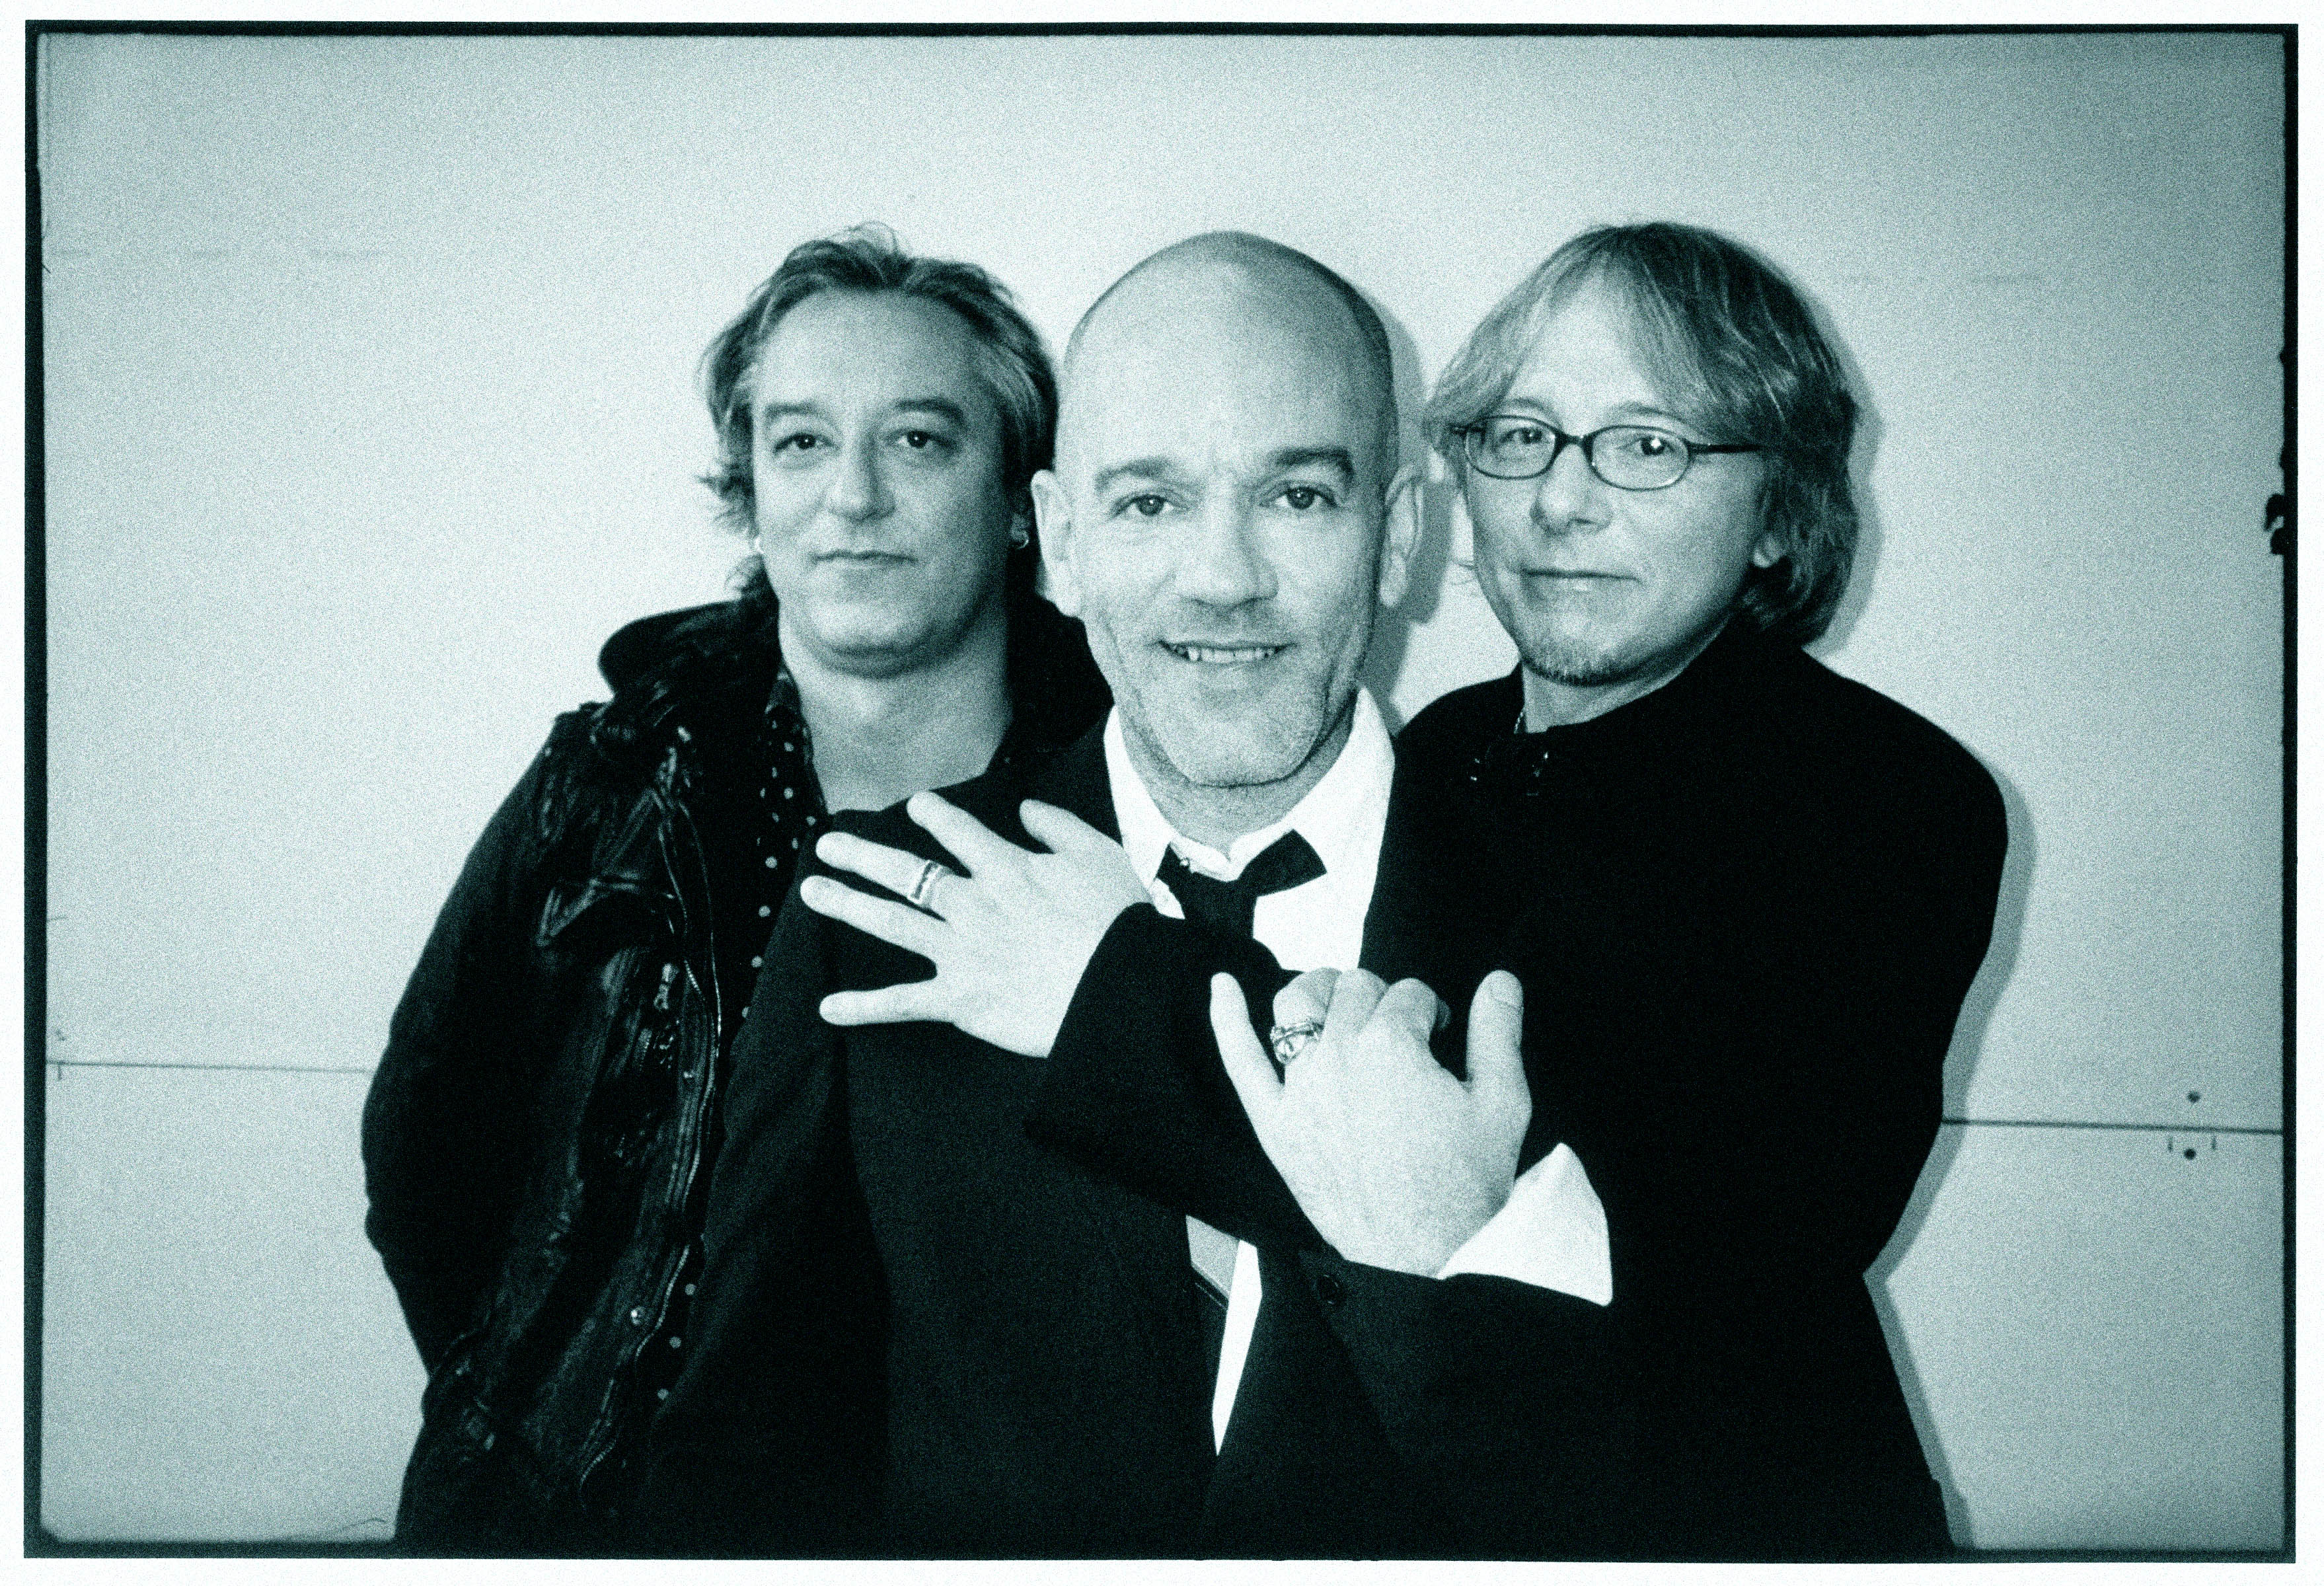 R.E.M. udgiver nyt materiale